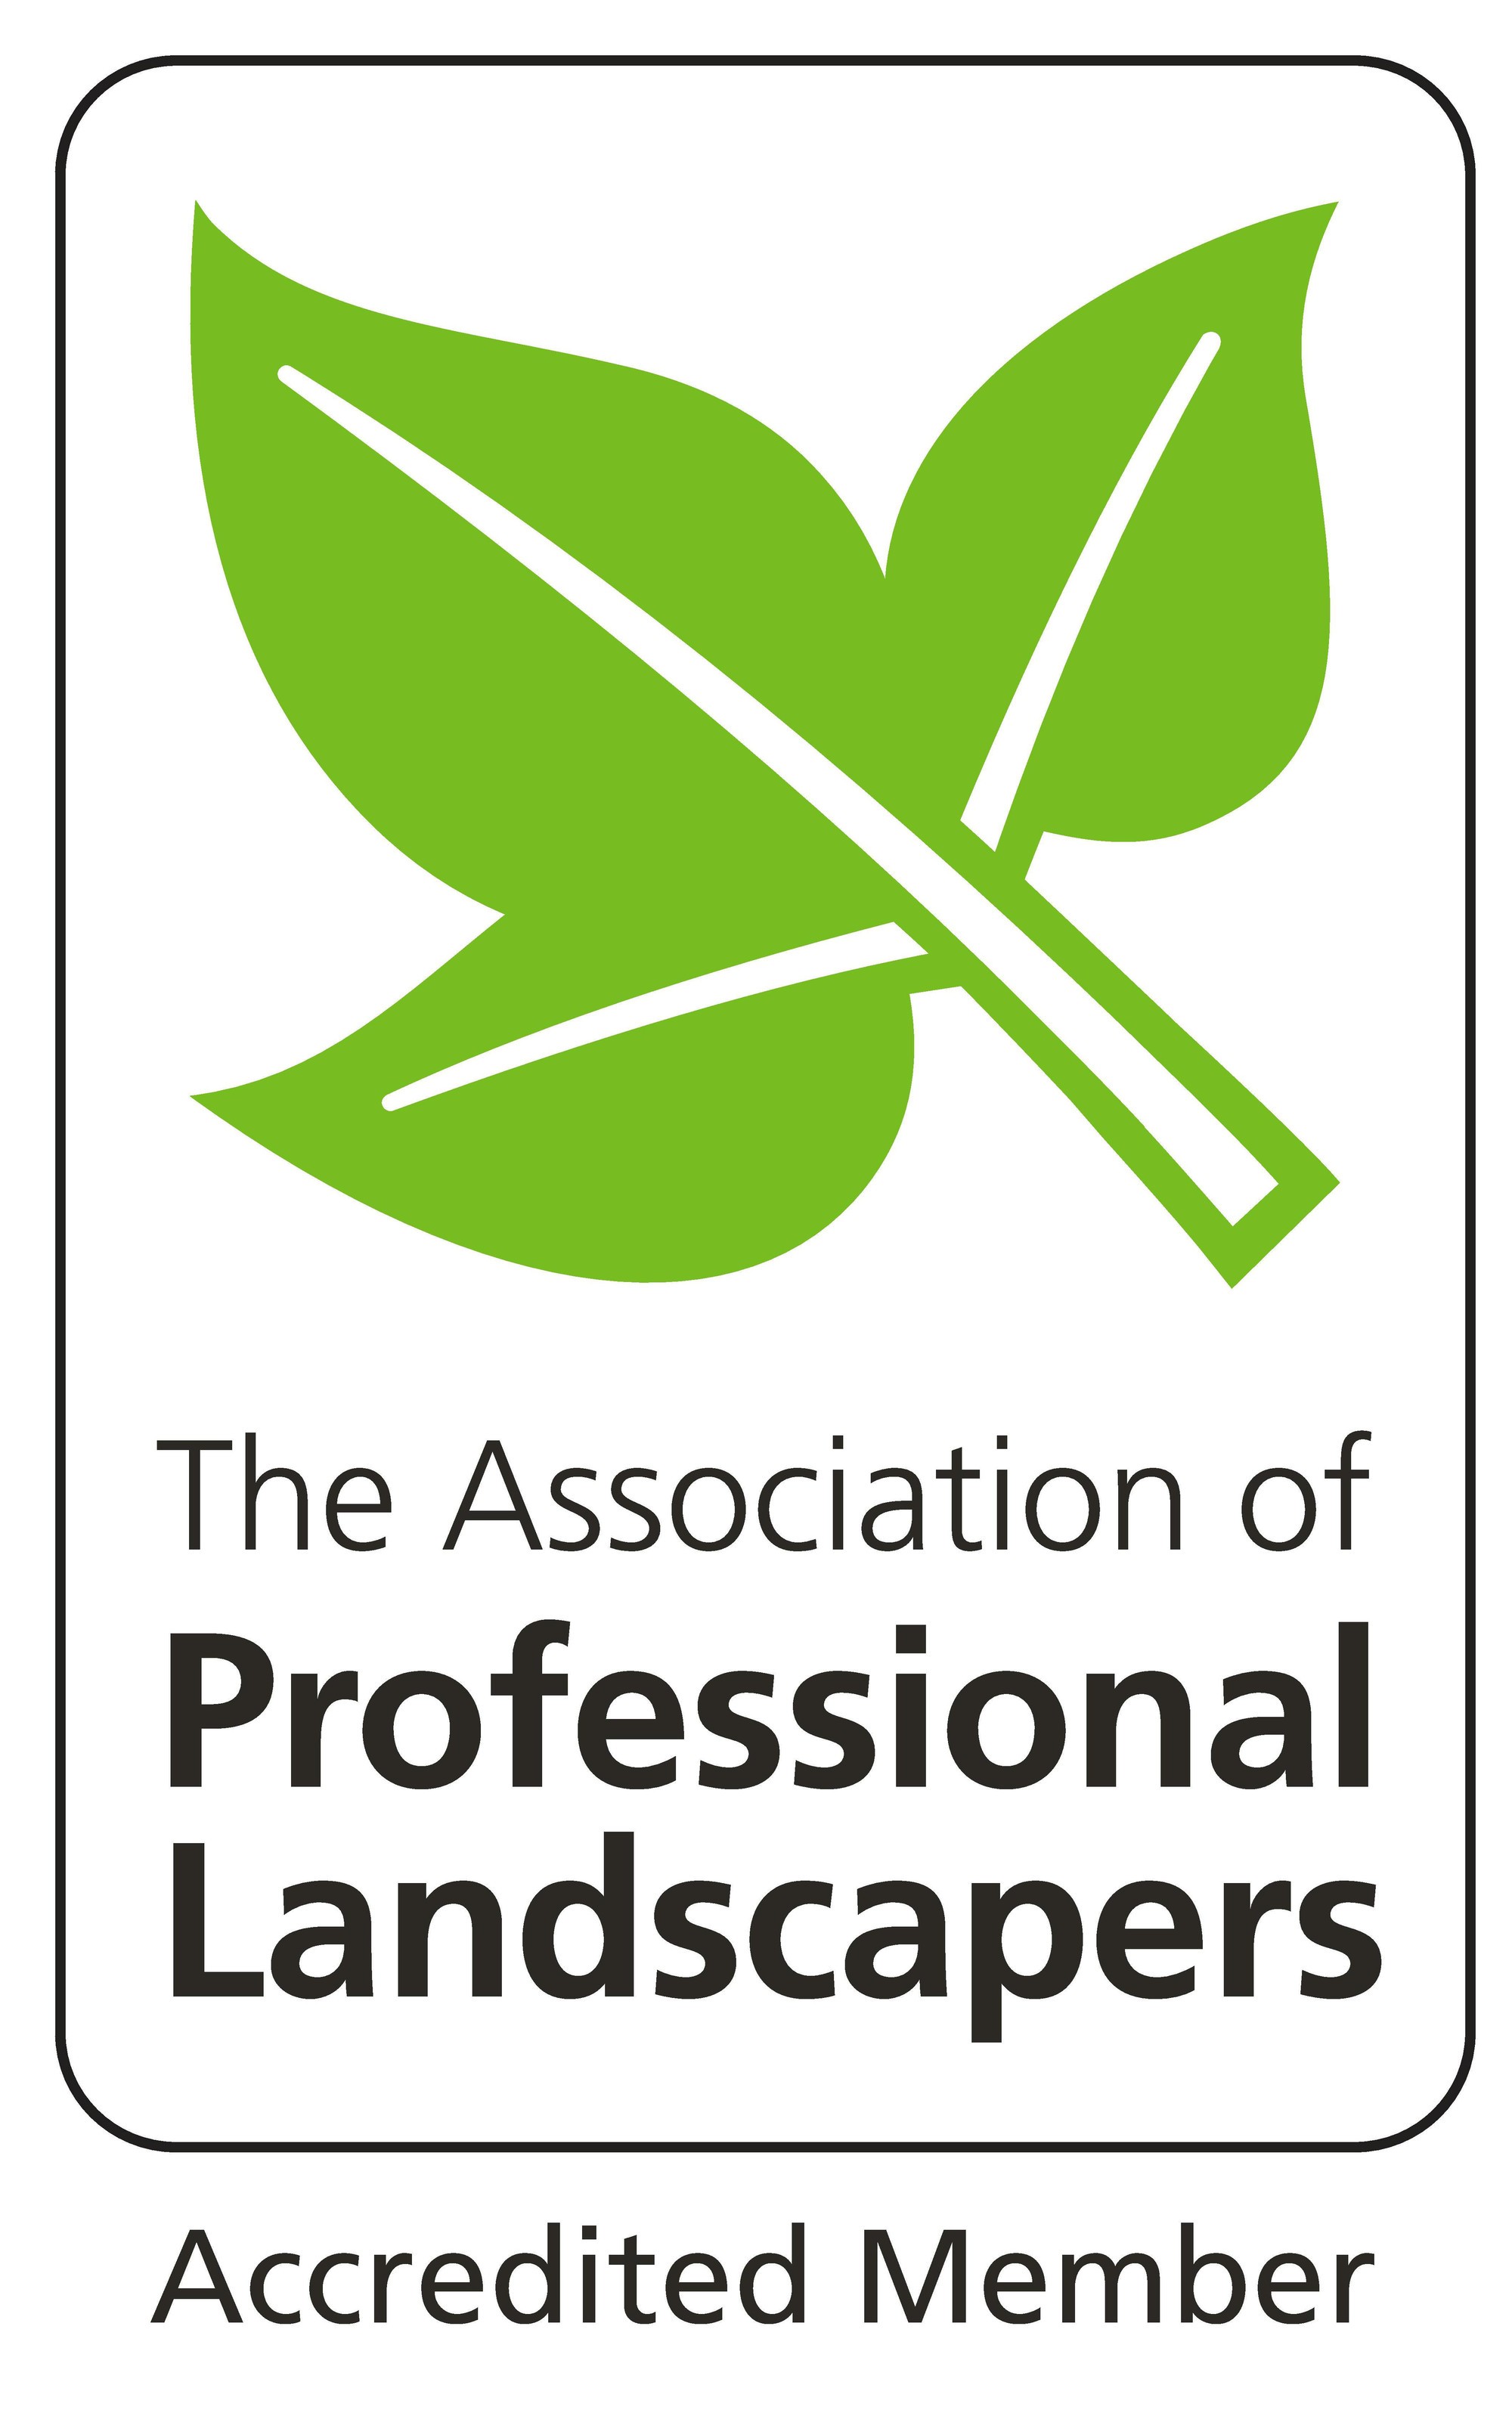 The Association of Professional Landscapers